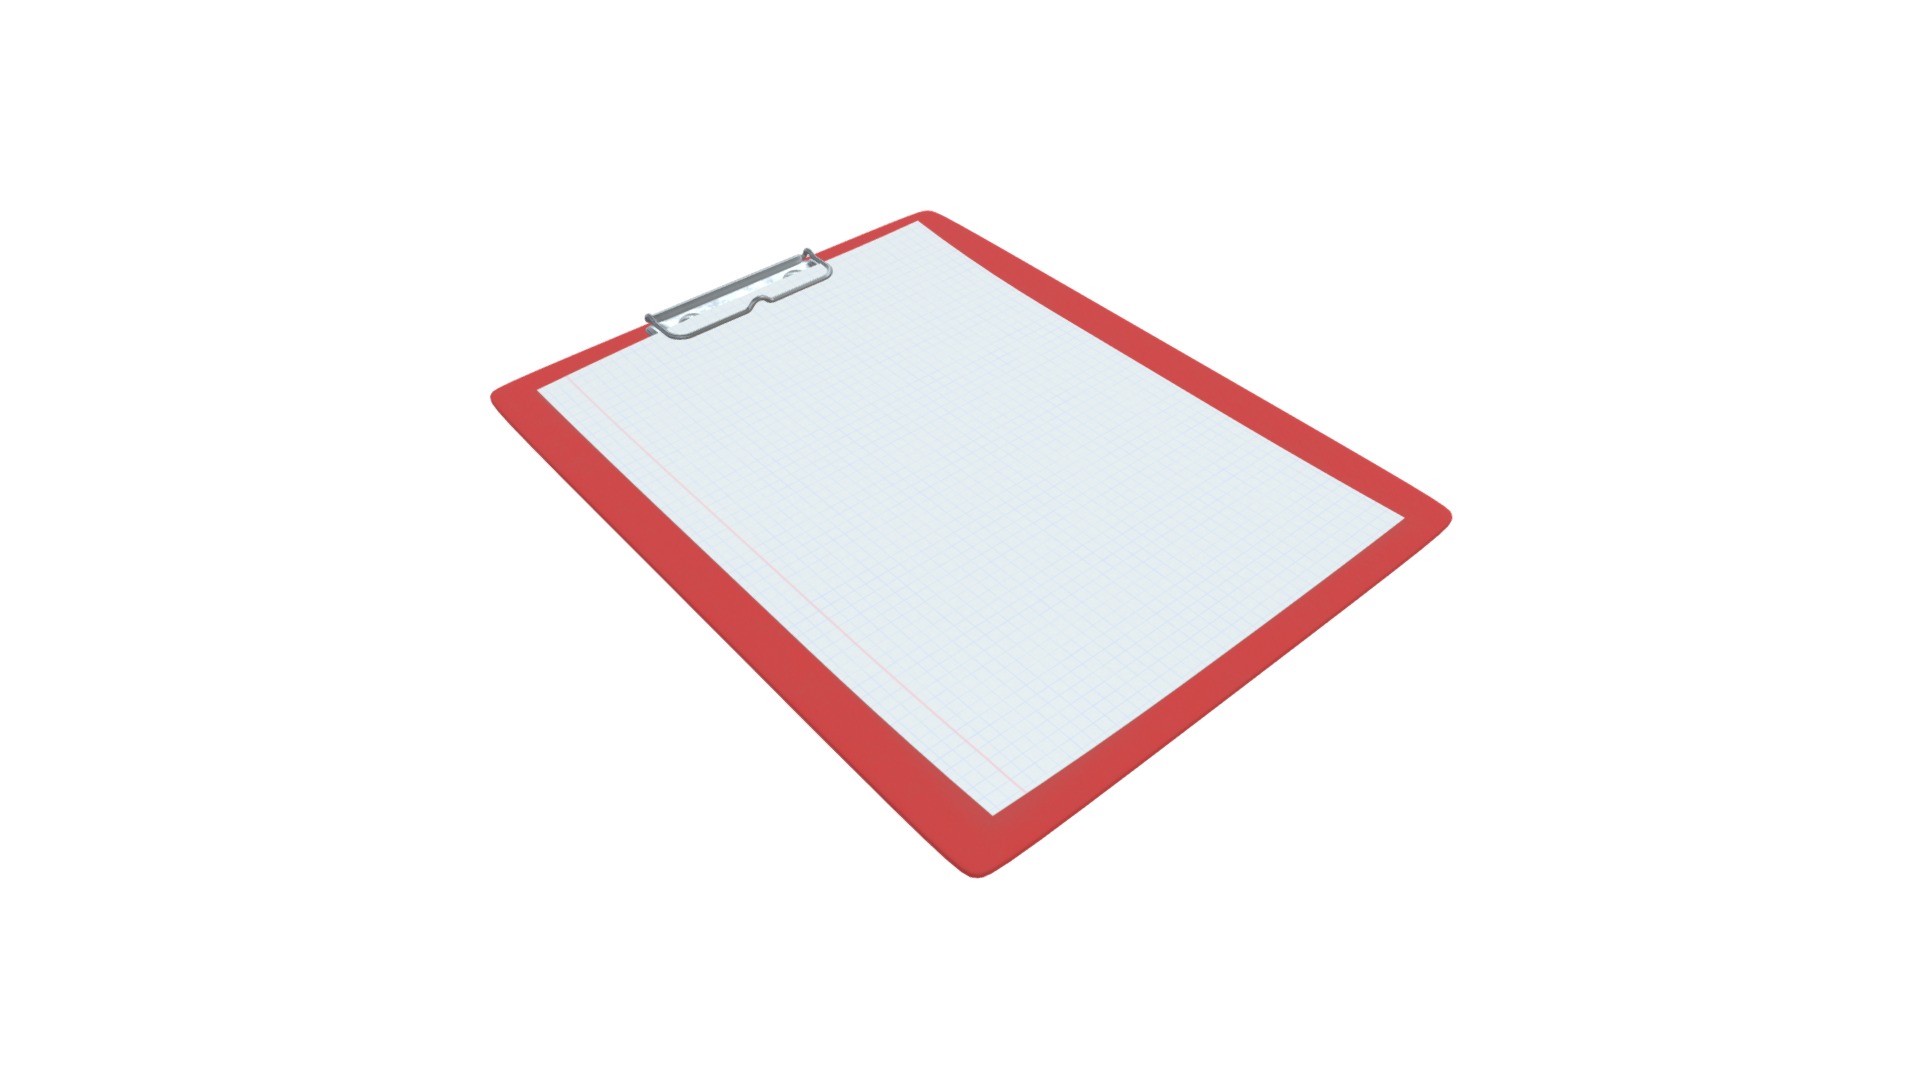 3D model Clipboard - This is a 3D model of the Clipboard. The 3D model is about a red triangle with a white background.